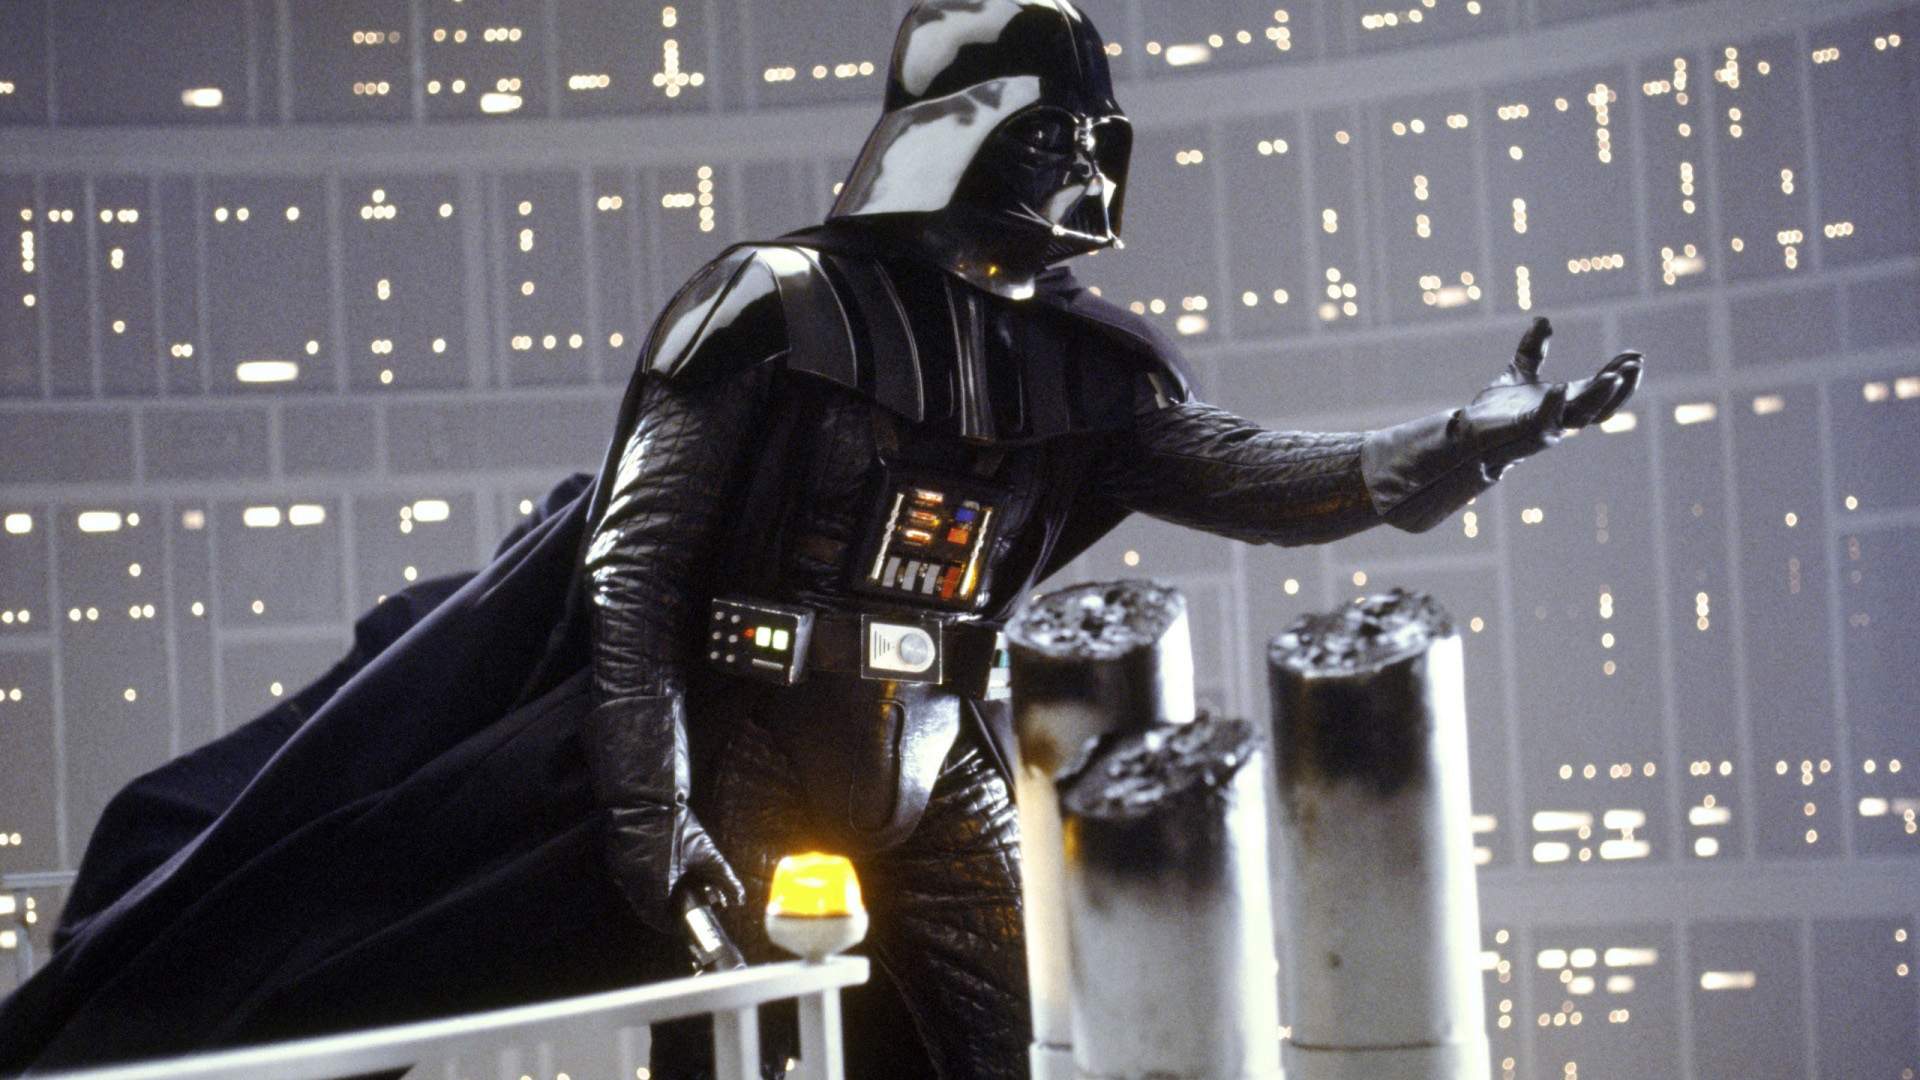 Brisbane Is Getting Another Star Wars Screening with a Live Orchestra